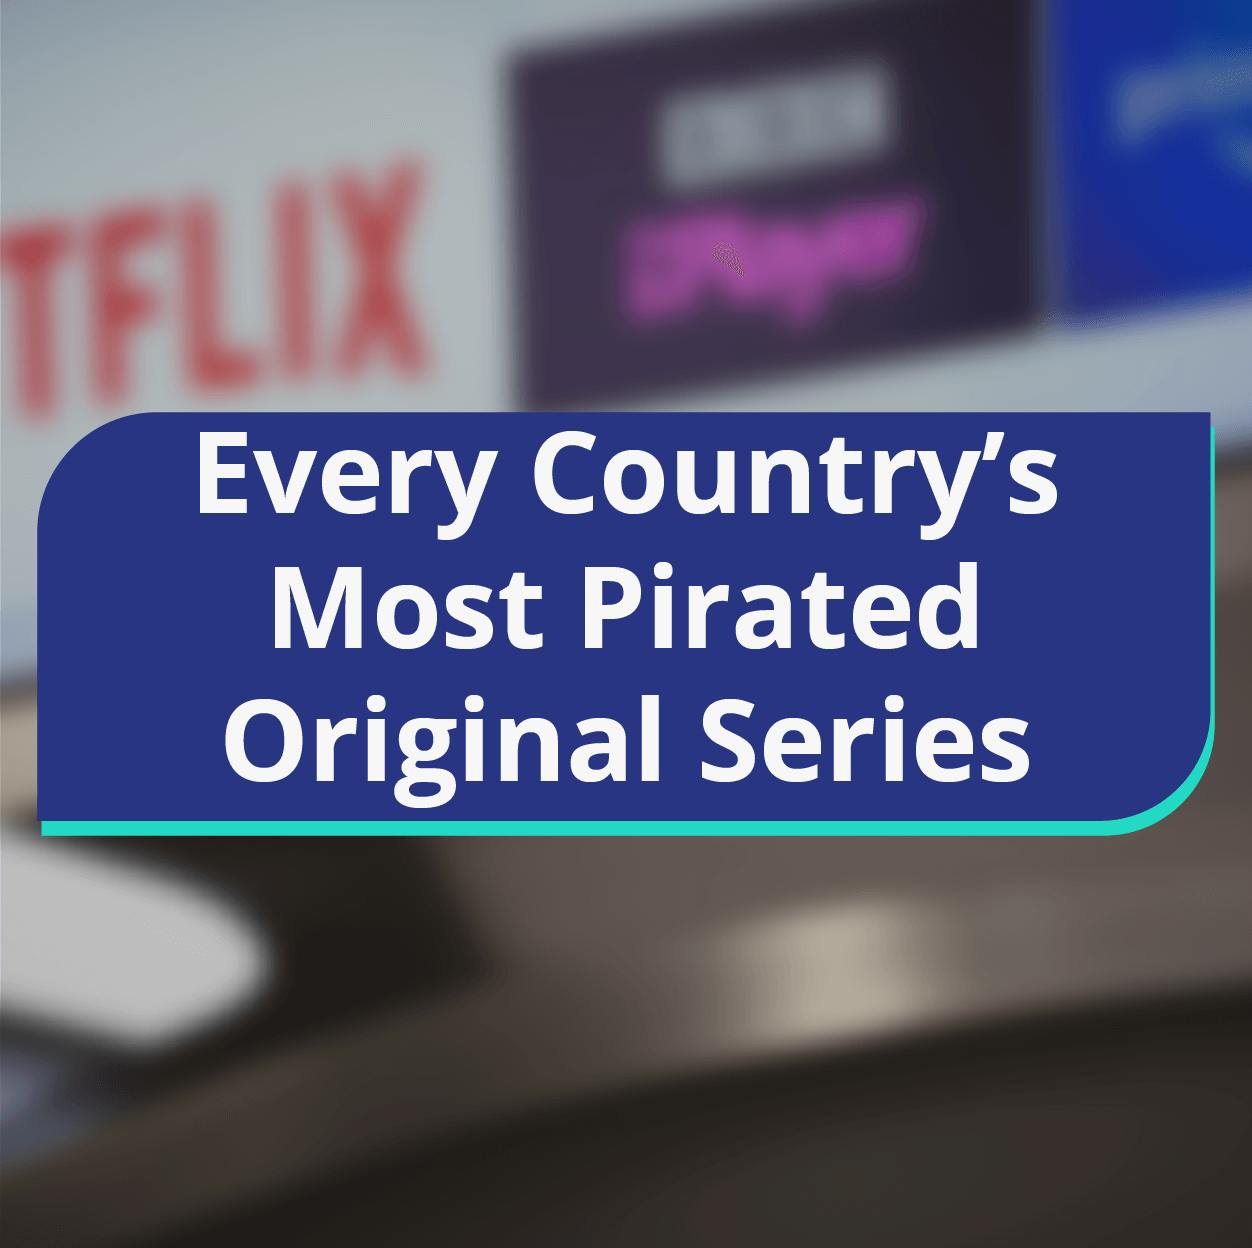 Every country's most pirated original series